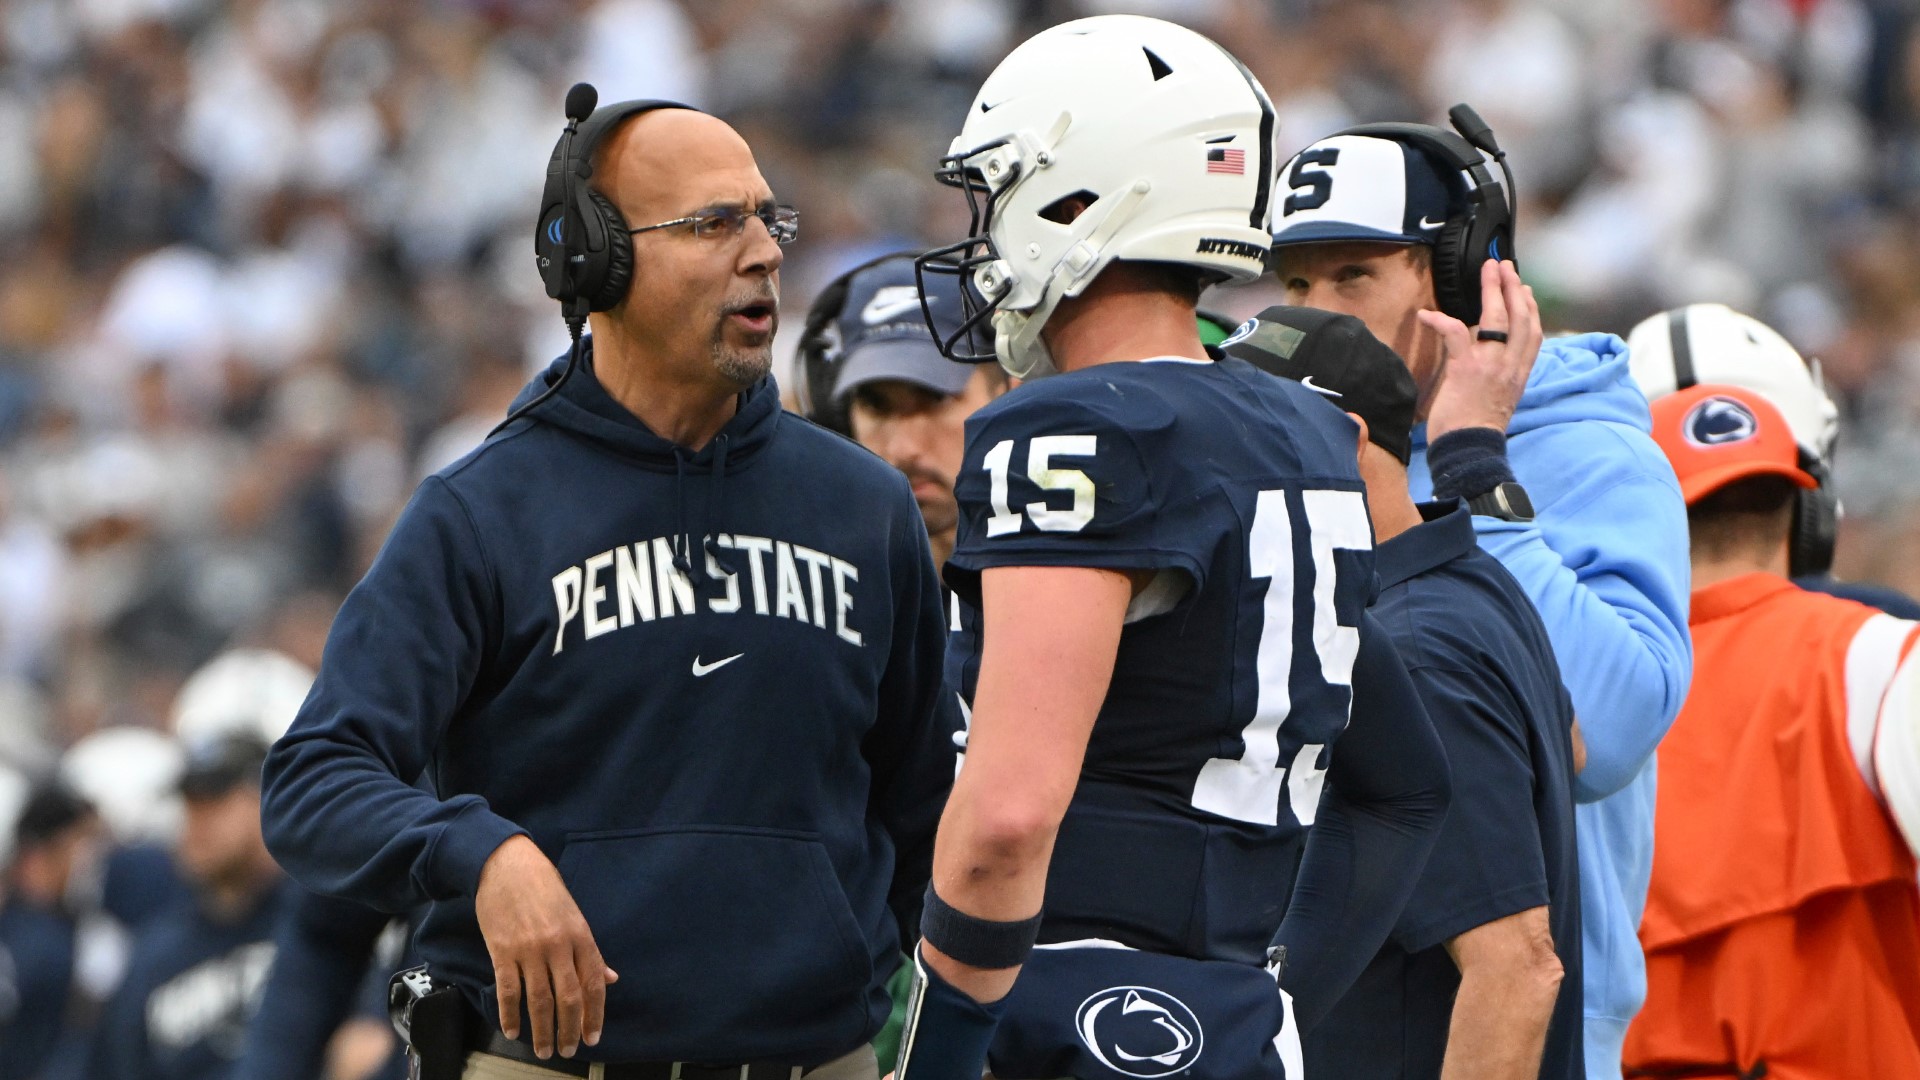 Penn State coach James Franklin spoke after his team eked out a win over Indiana.